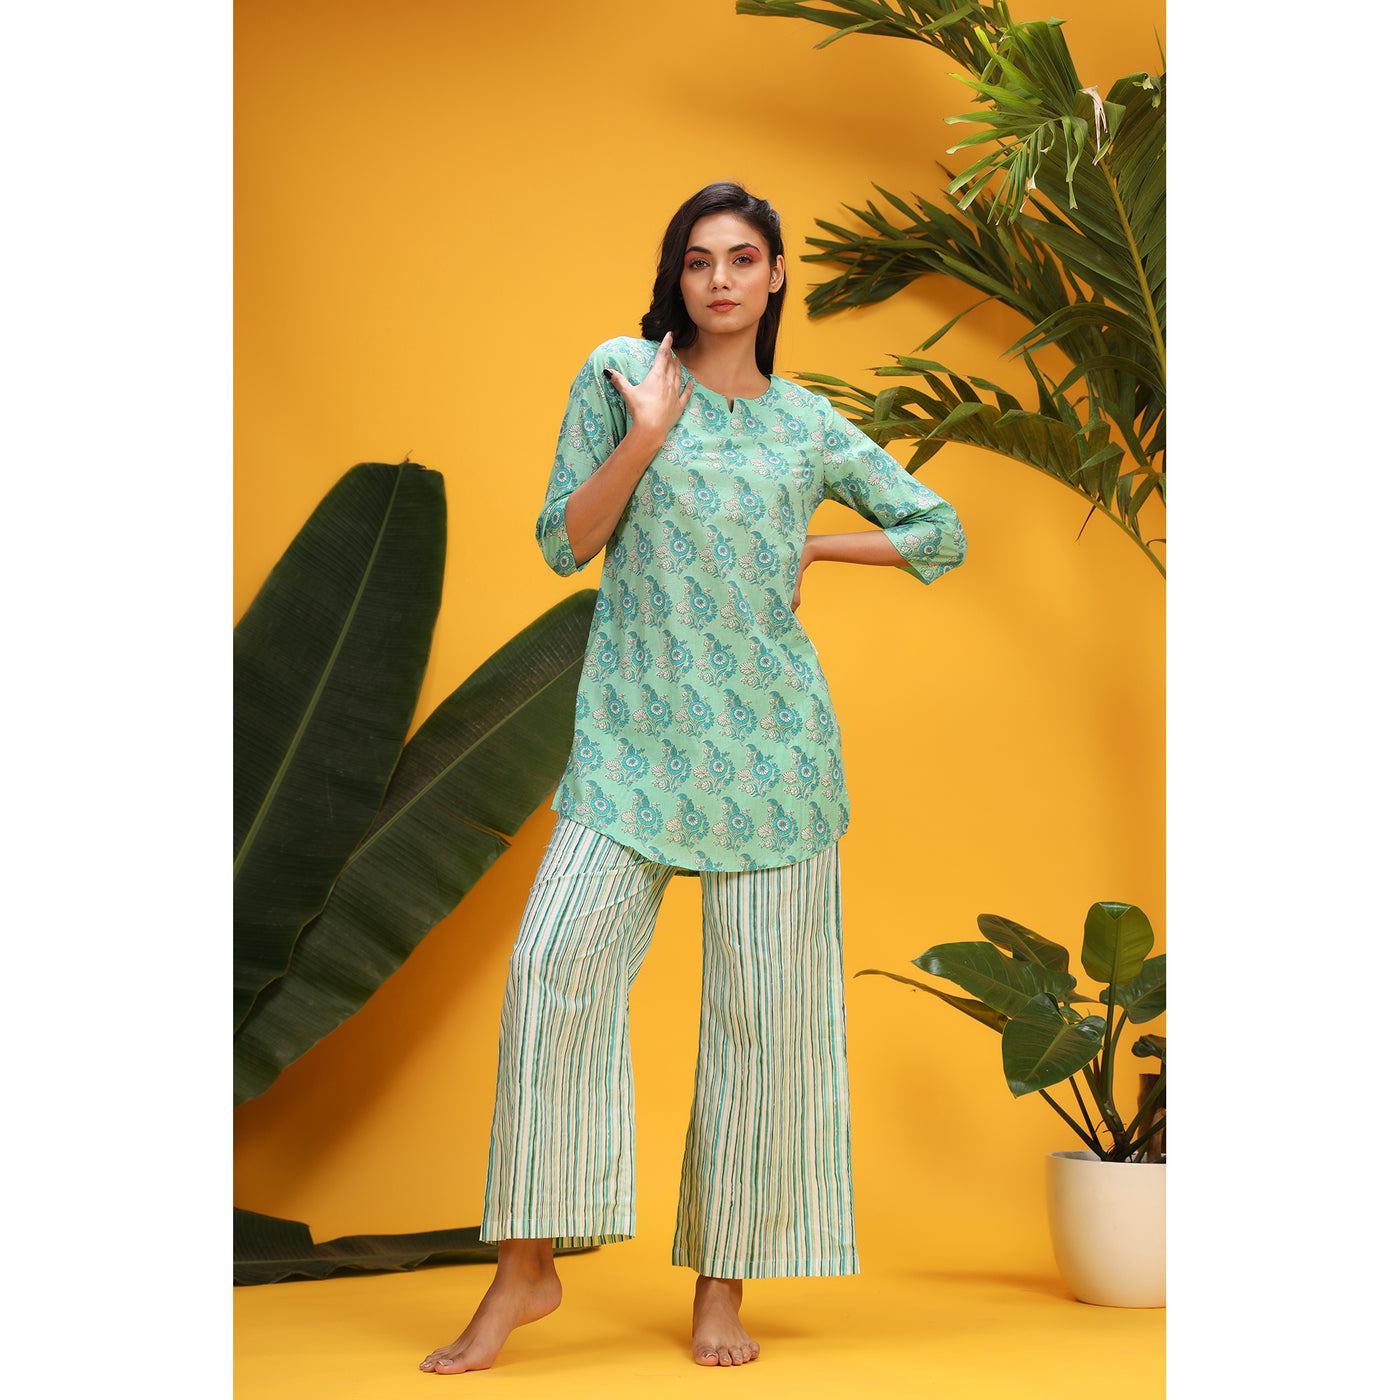 Garland with Contrast Stripes on Green Loungewear